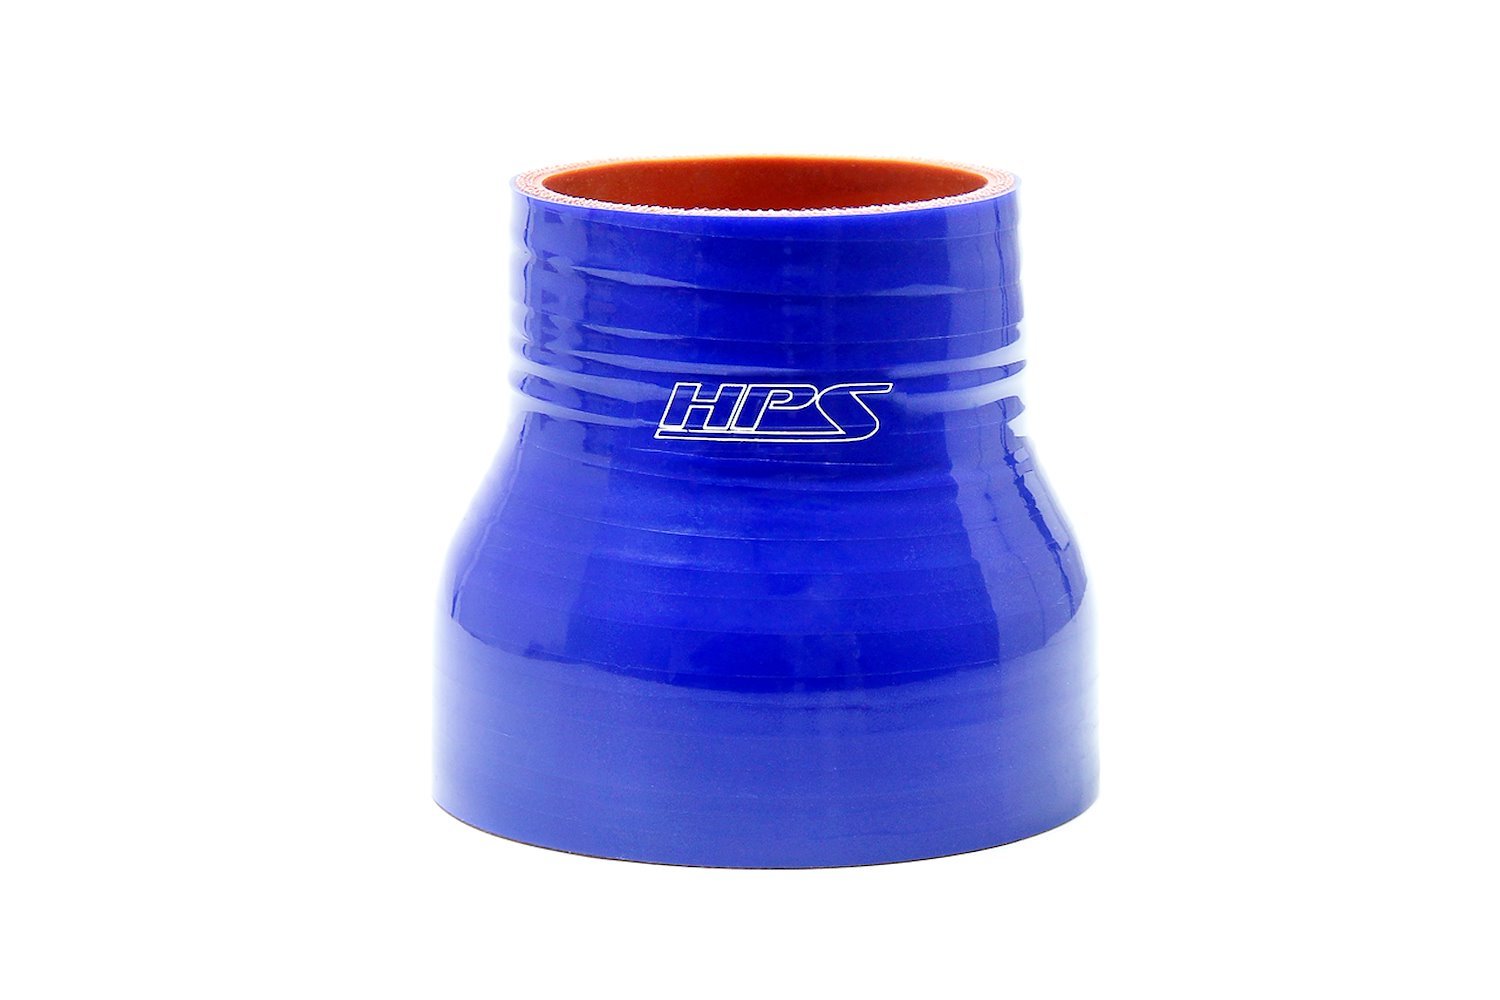 HTSR-250-325-BLUE Silicone Reducer Hose, High-Temp 4-Ply Reinforced, 2-1/2 in. - 3-1/4 in. ID, 3 in. Long, Blue